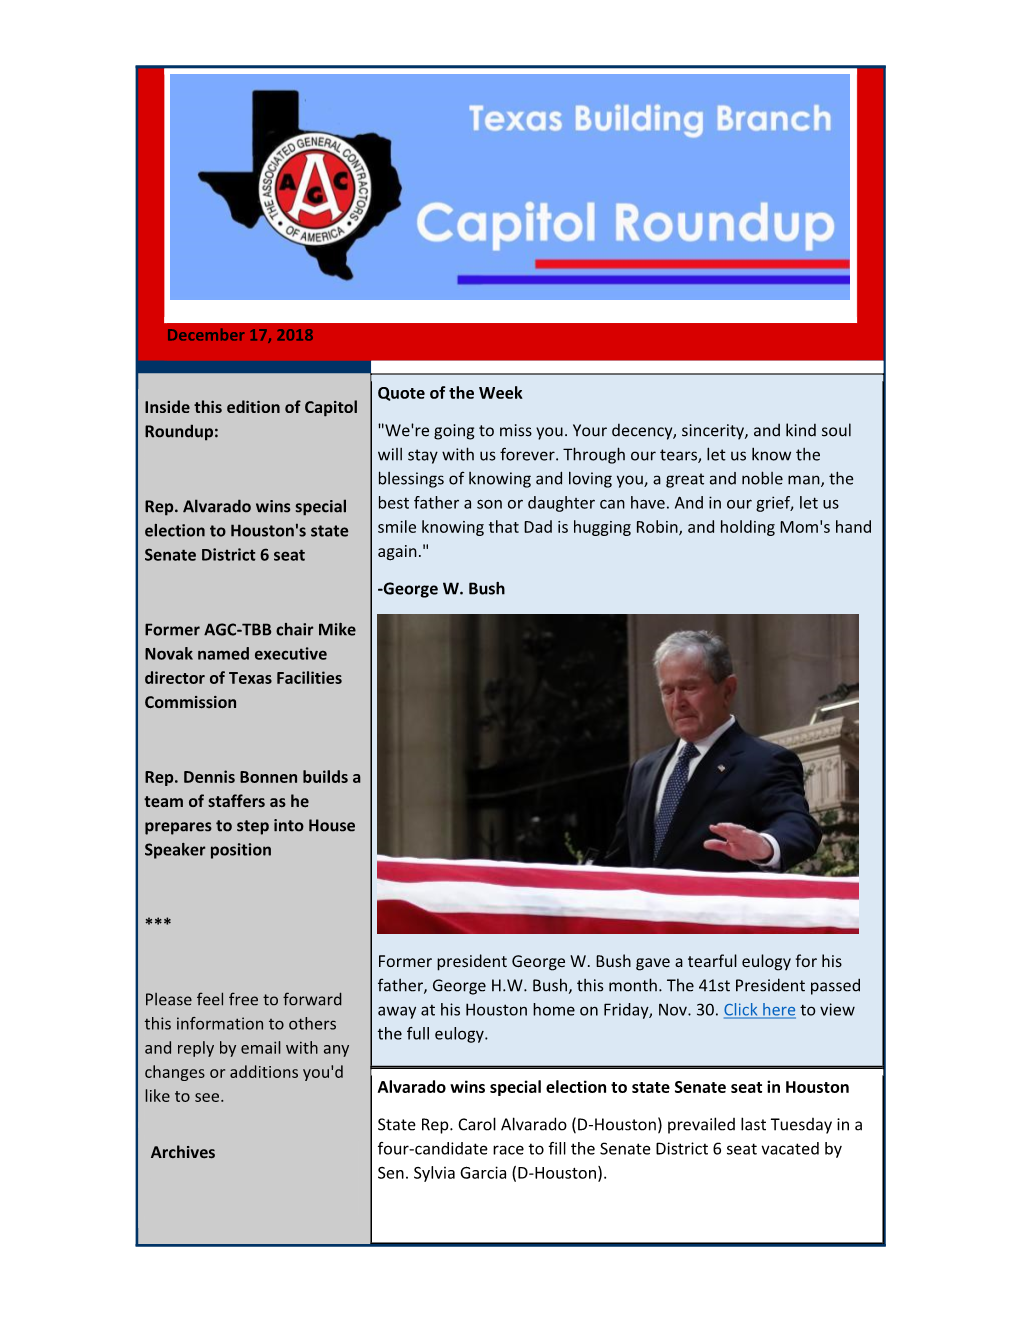 December 17, 2018 Inside This Edition of Capitol Roundup: Rep. Alvarado Wins Special Election to Houston's State Senate District